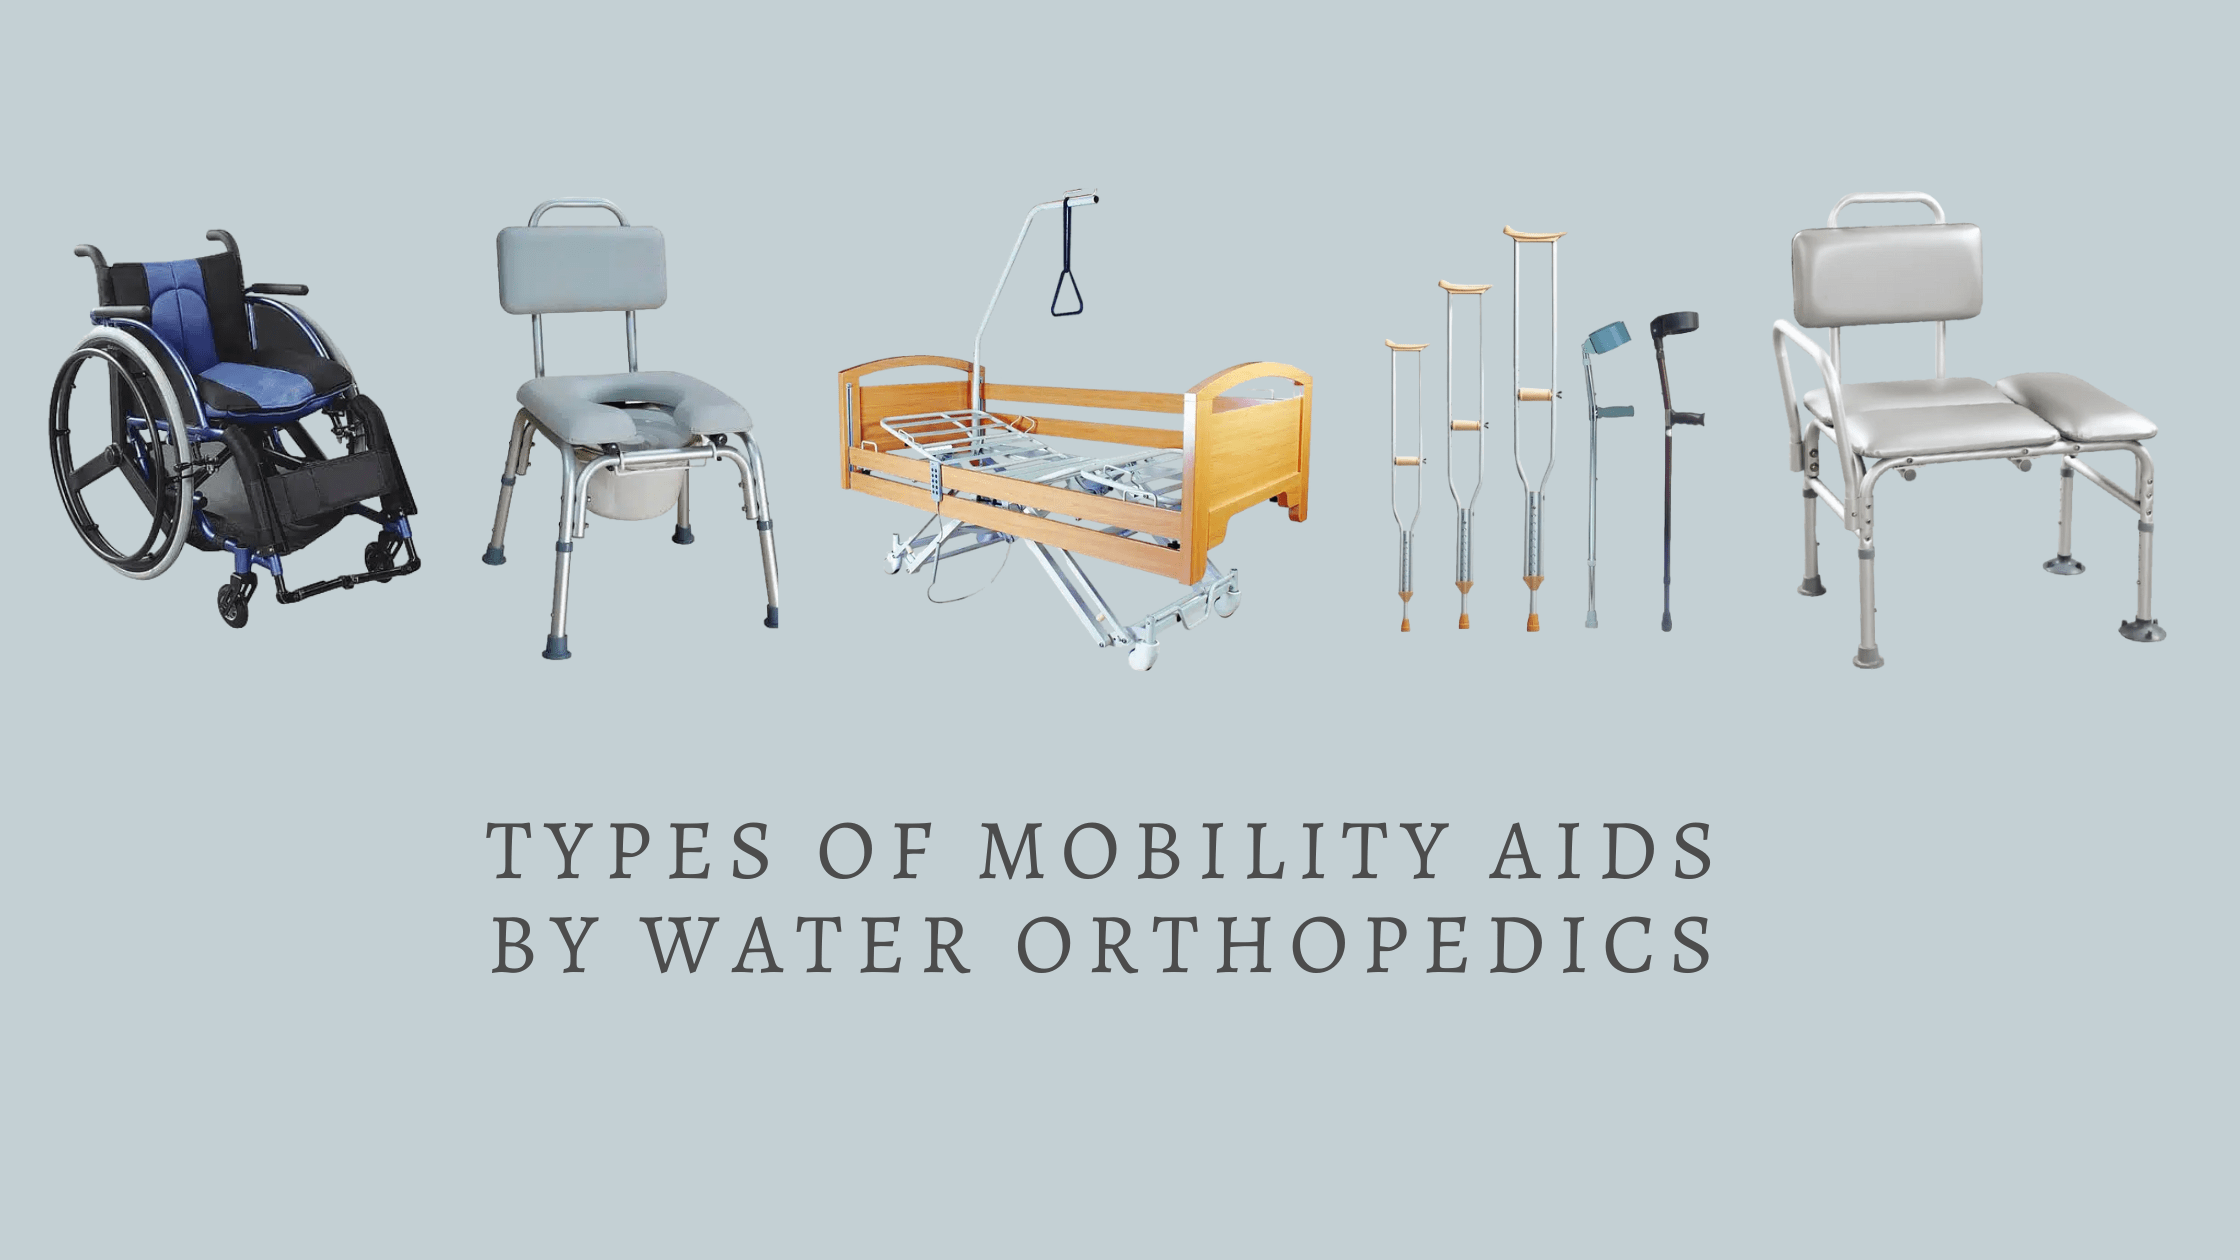 Types of Mobility Aids by Water Orthopedics - Water Orthopedics